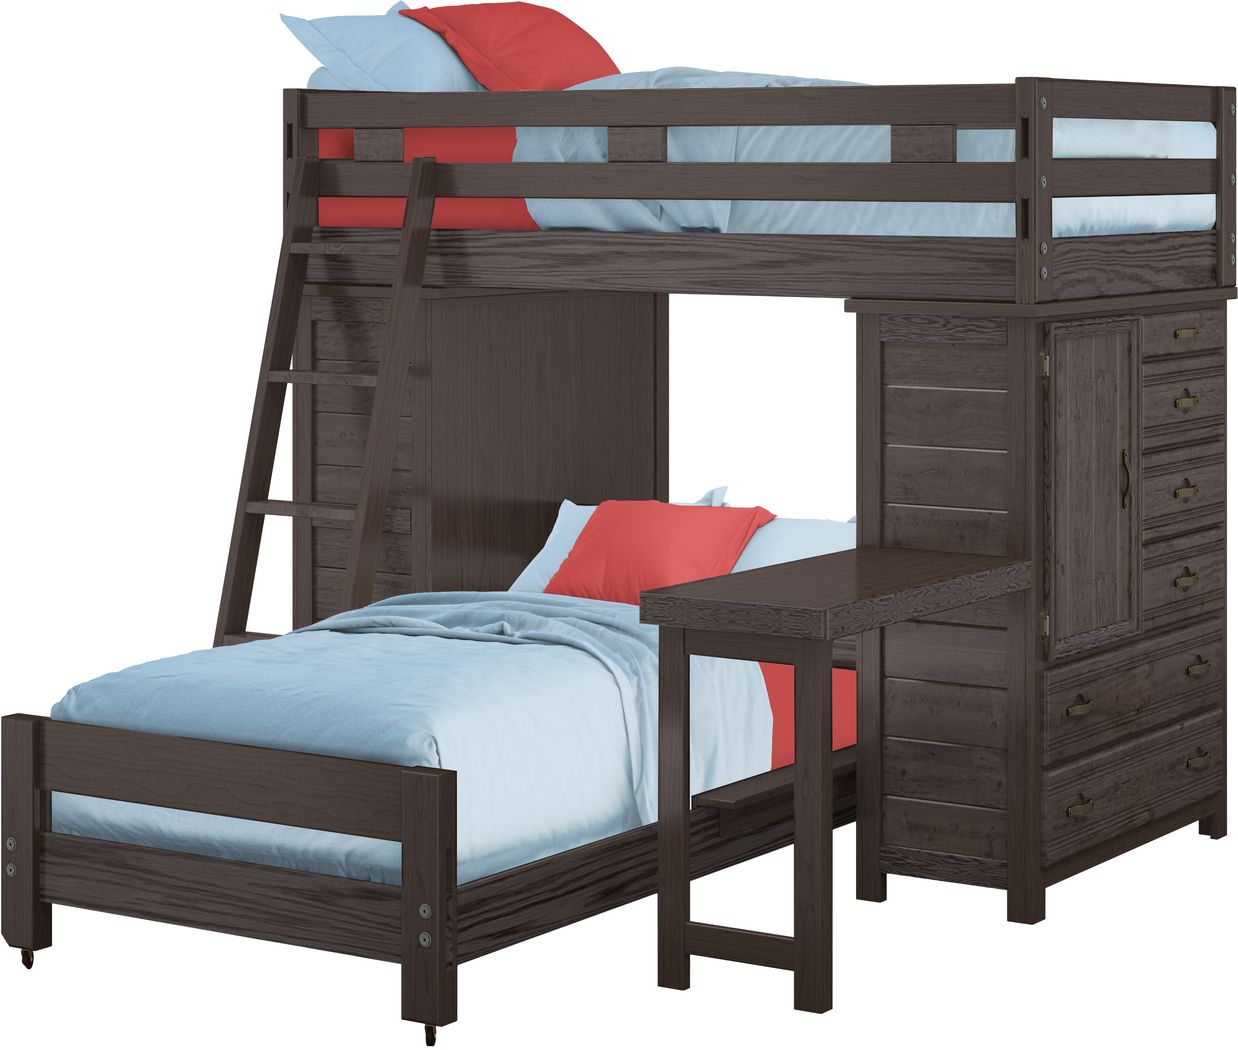 Creekside Furniture Collection Bunk, Creekside Bunk Bed Reviews